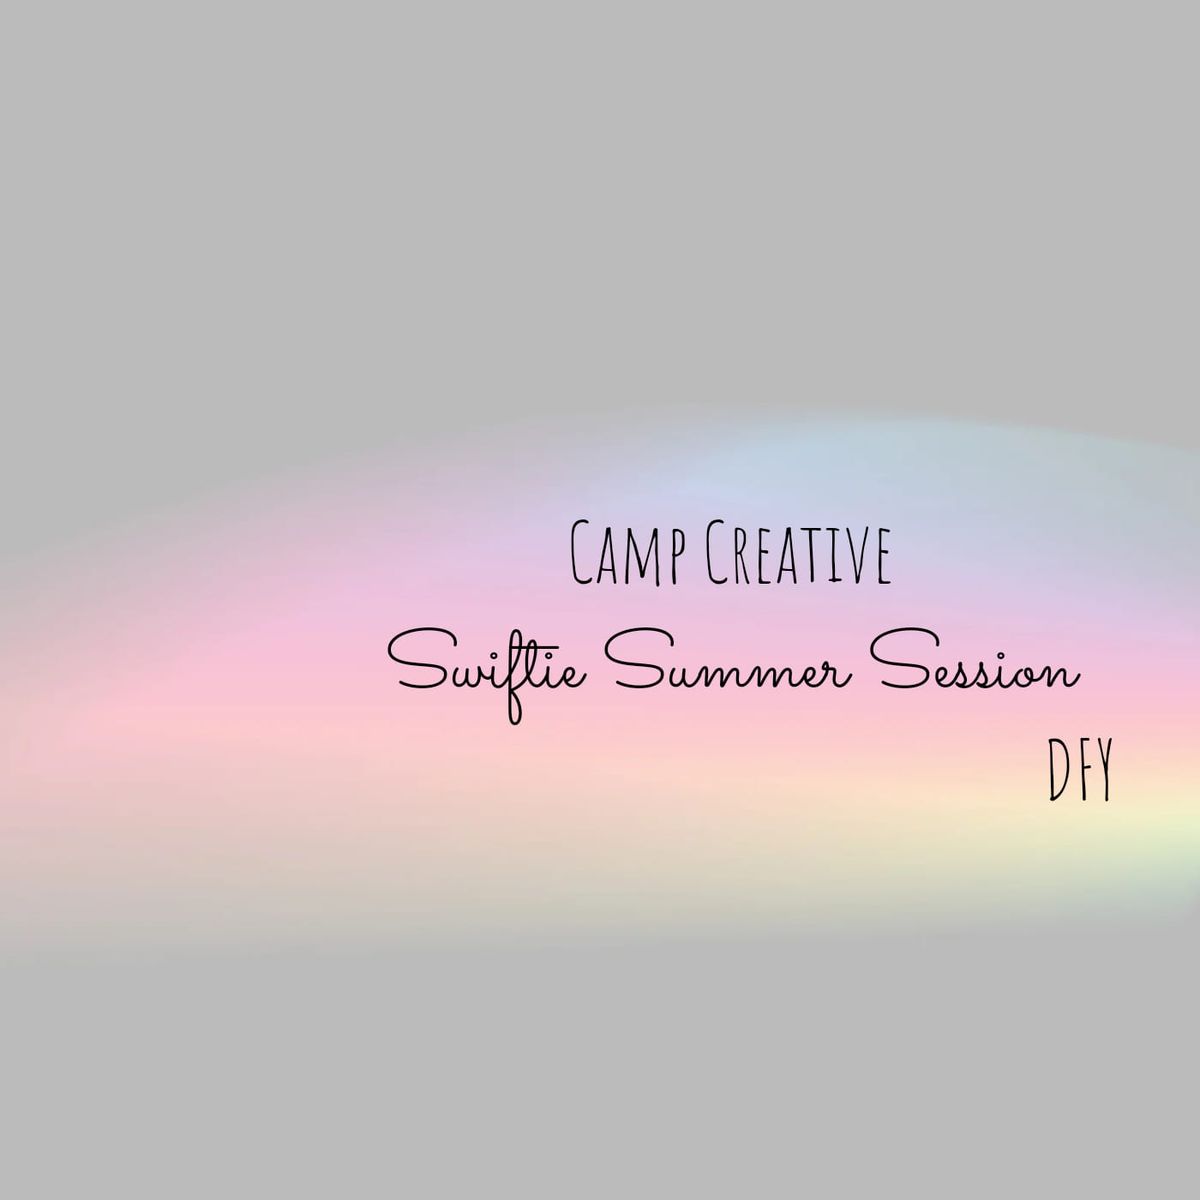 Camp Creative -Week Two -Swiftie Summer Session 